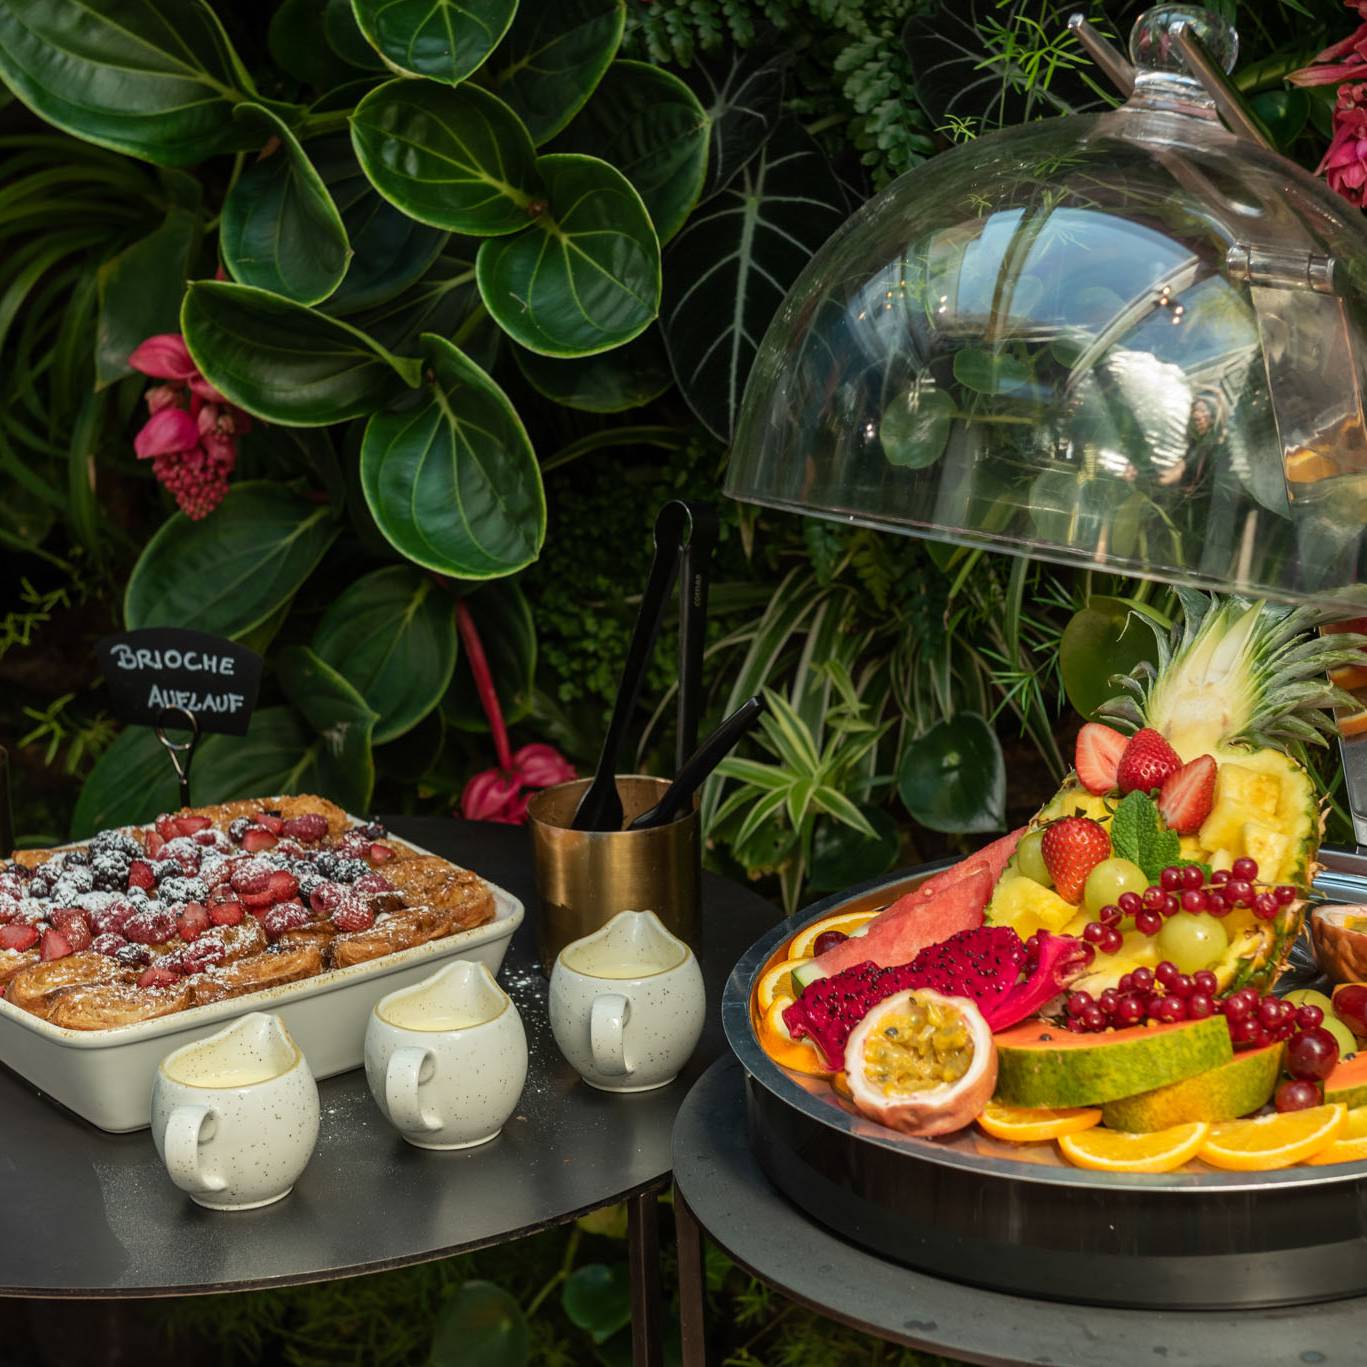 Culinary variety - fresh fruit under a glass dome